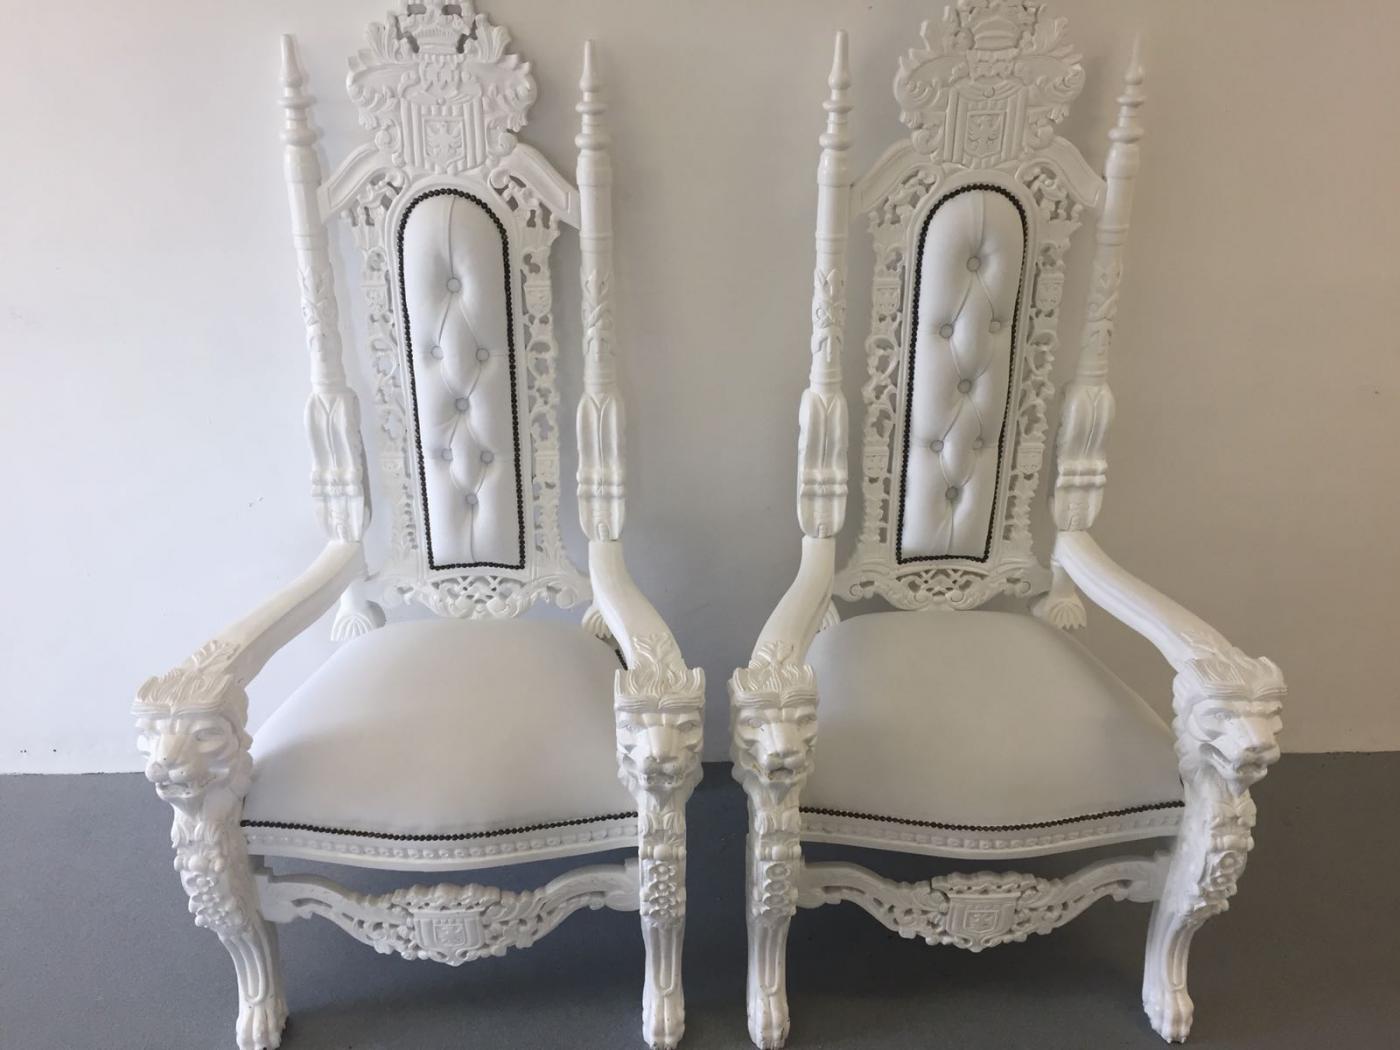 throne chairs for proms norwich